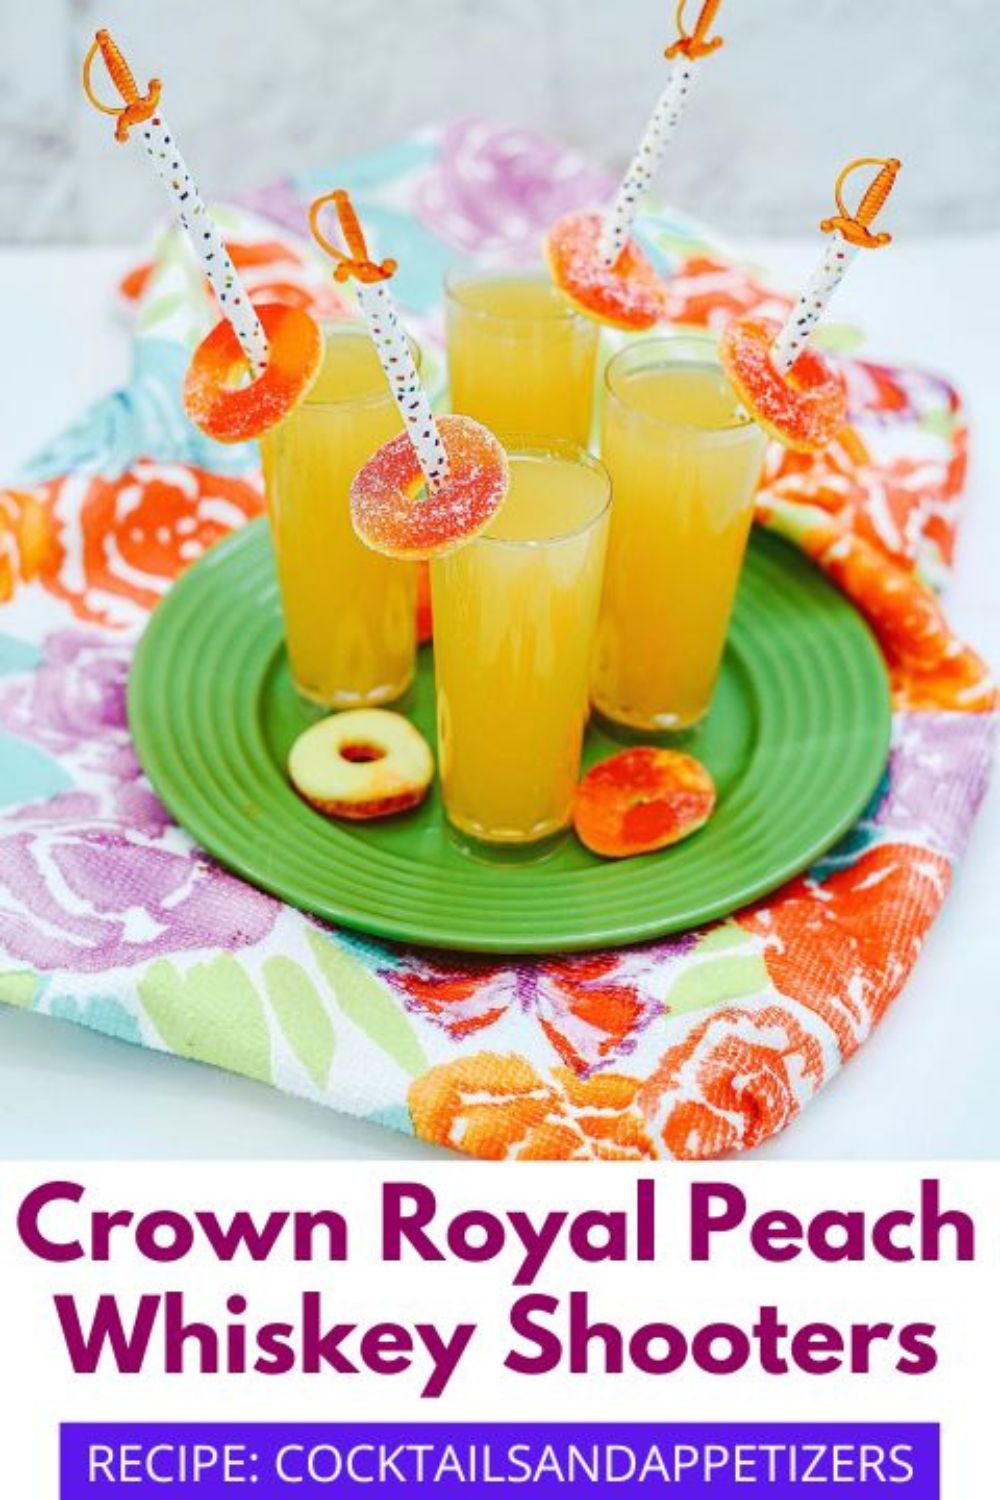 Crown Royal Peach Whisky Shooters on a green tray